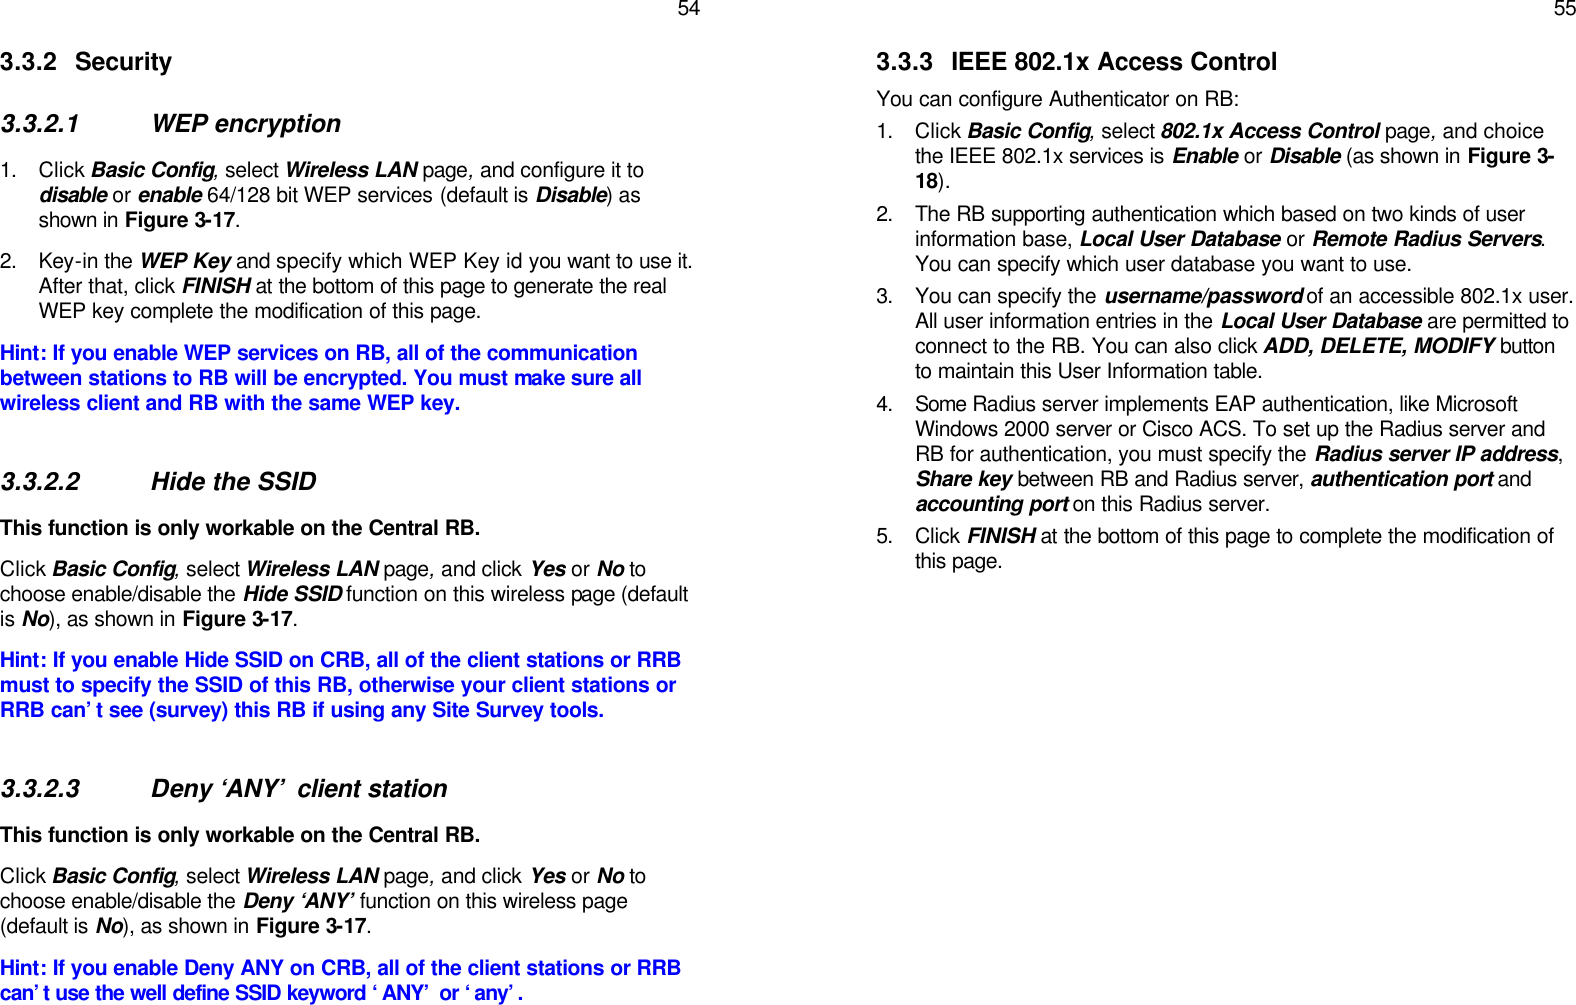   54 3.3.2 Security  3.3.2.1 WEP encryption 1. Click Basic Config, select Wireless LAN page, and configure it to disable or enable 64/128 bit WEP services (default is Disable) as shown in Figure 3-17.  2. Key-in the WEP Key and specify which WEP Key id you want to use it. After that, click FINISH at the bottom of this page to generate the real WEP key complete the modification of this page. Hint: If you enable WEP services on RB, all of the communication between stations to RB will be encrypted. You must make sure all wireless client and RB with the same WEP key.  3.3.2.2 Hide the SSID This function is only workable on the Central RB. Click Basic Config, select Wireless LAN page, and click Yes or No to choose enable/disable the Hide SSID function on this wireless page (default is No), as shown in Figure 3-17.  Hint: If you enable Hide SSID on CRB, all of the client stations or RRB must to specify the SSID of this RB, otherwise your client stations or RRB can’t see (survey) this RB if using any Site Survey tools.  3.3.2.3 Deny ‘ANY’ client station This function is only workable on the Central RB. Click Basic Config, select Wireless LAN page, and click Yes or No to choose enable/disable the Deny ‘ANY’ function on this wireless page (default is No), as shown in Figure 3-17.  Hint: If you enable Deny ANY on CRB, all of the client stations or RRB can’t use the well define SSID keyword ‘ANY’ or ‘any’.     55 3.3.3 IEEE 802.1x Access Control You can configure Authenticator on RB: 1. Click Basic Config, select 802.1x Access Control page, and choice the IEEE 802.1x services is Enable or Disable (as shown in Figure 3-18). 2. The RB supporting authentication which based on two kinds of user information base, Local User Database or Remote Radius Servers. You can specify which user database you want to use. 3. You can specify the username/password of an accessible 802.1x user. All user information entries in the Local User Database are permitted to connect to the RB. You can also click ADD, DELETE, MODIFY button to maintain this User Information table. 4. Some Radius server implements EAP authentication, like Microsoft Windows 2000 server or Cisco ACS. To set up the Radius server and RB for authentication, you must specify the Radius server IP address, Share key between RB and Radius server, authentication port and accounting port on this Radius server. 5. Click FINISH at the bottom of this page to complete the modification of this page.  